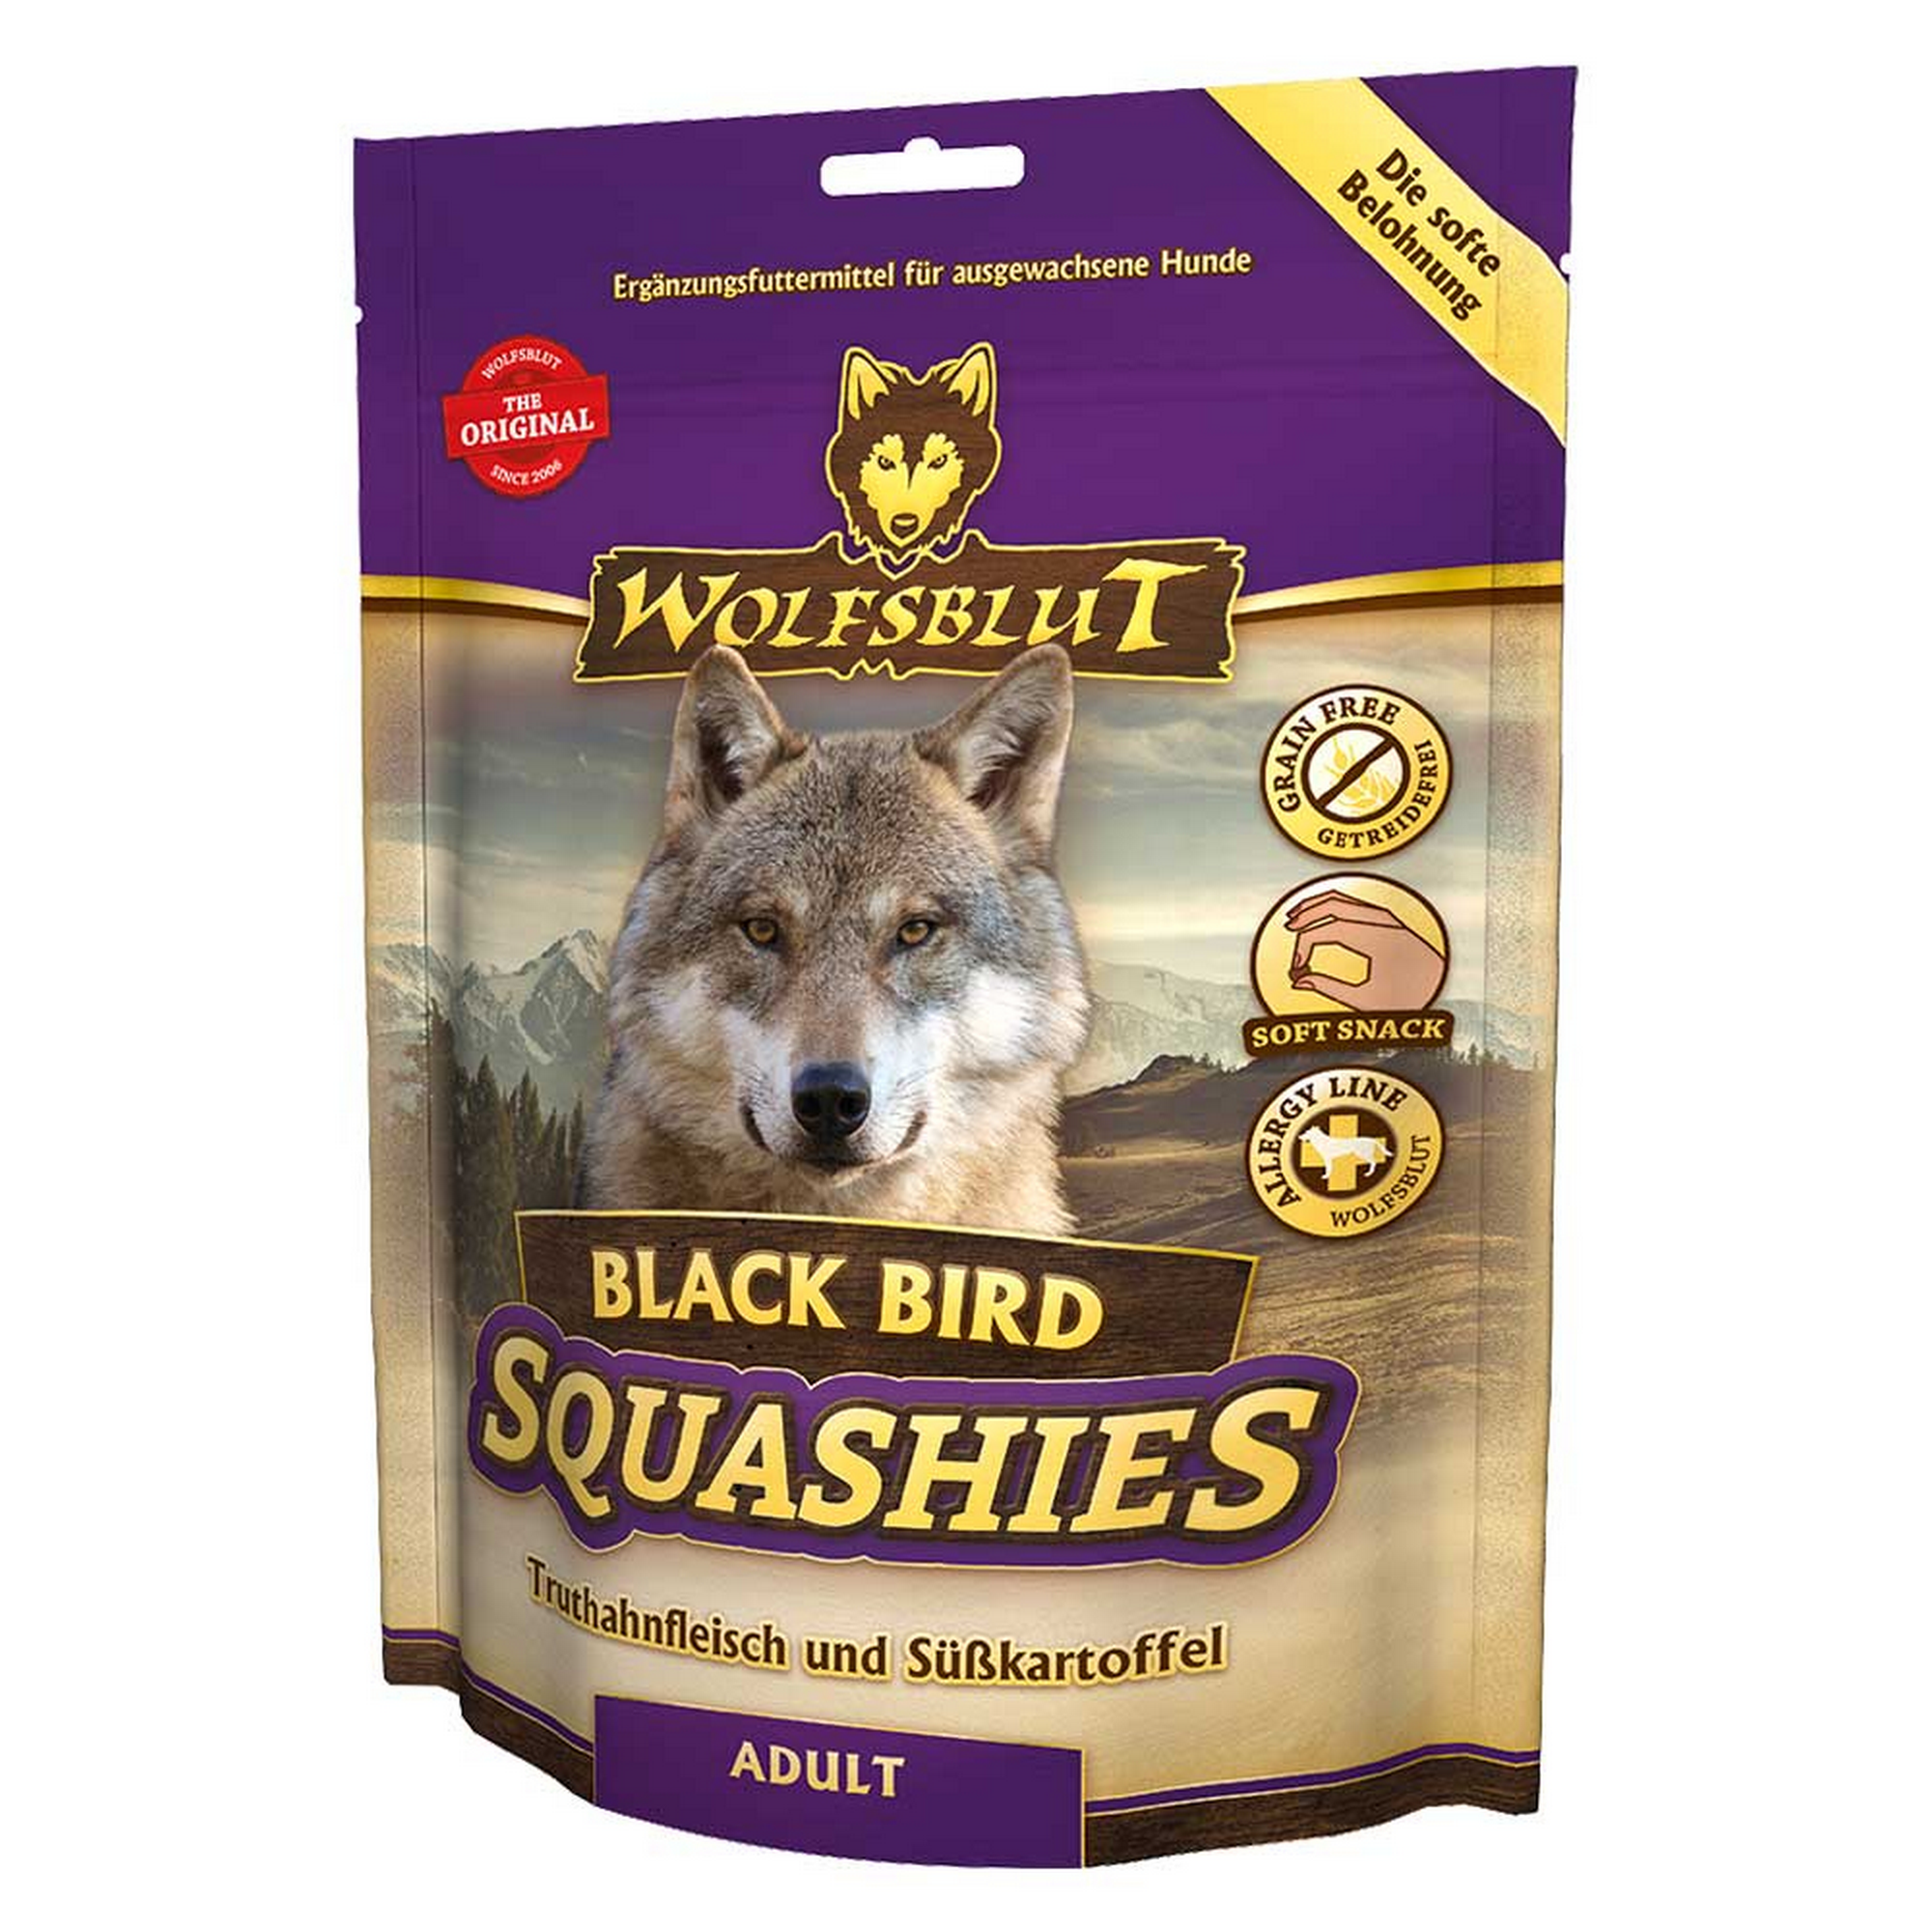 Hundesnack 'Black Bird Squashies' Adult 300 g + product picture